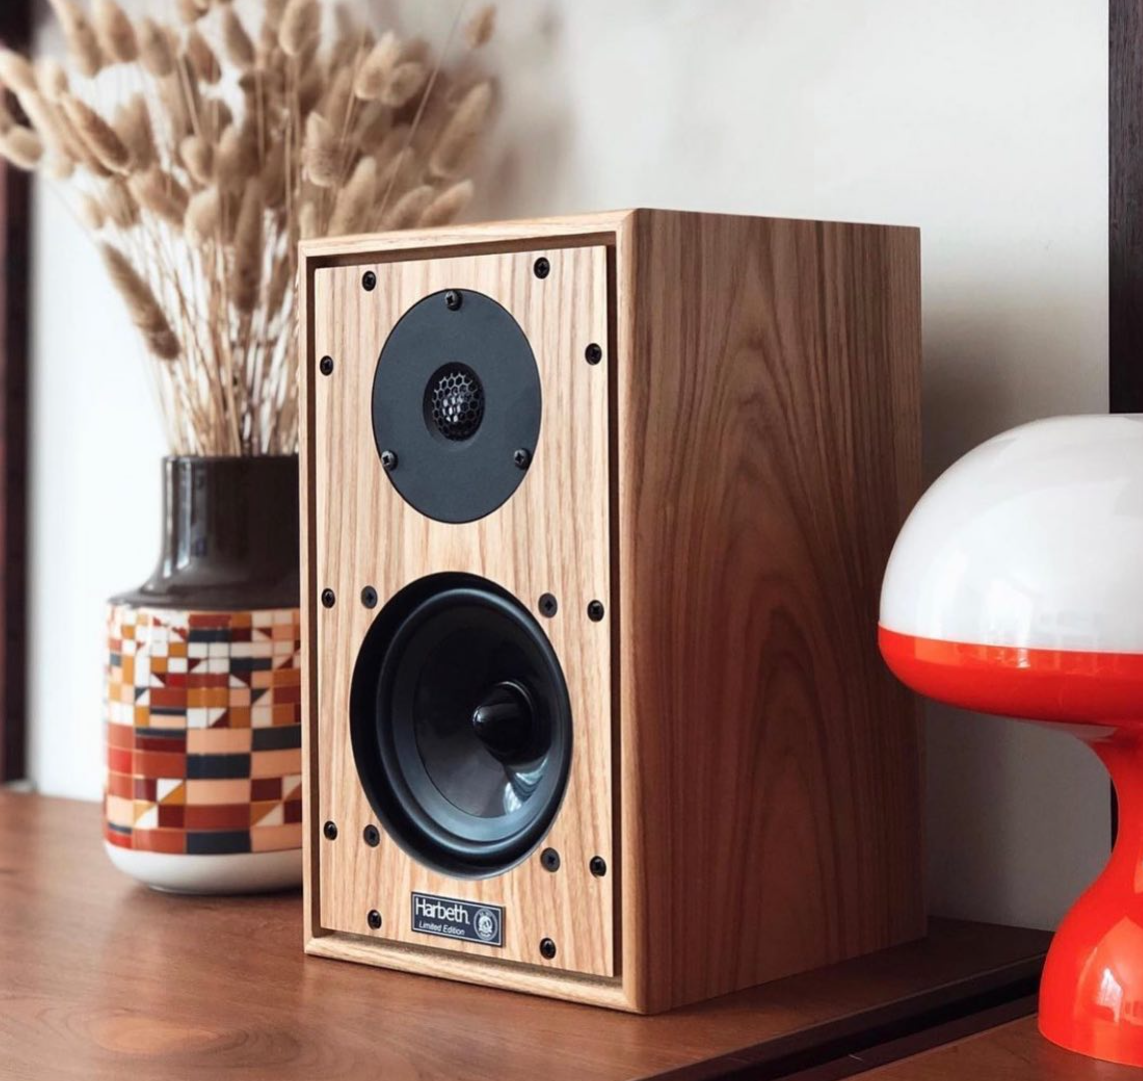 Experience pure musicality with Harbeth loudspeakers